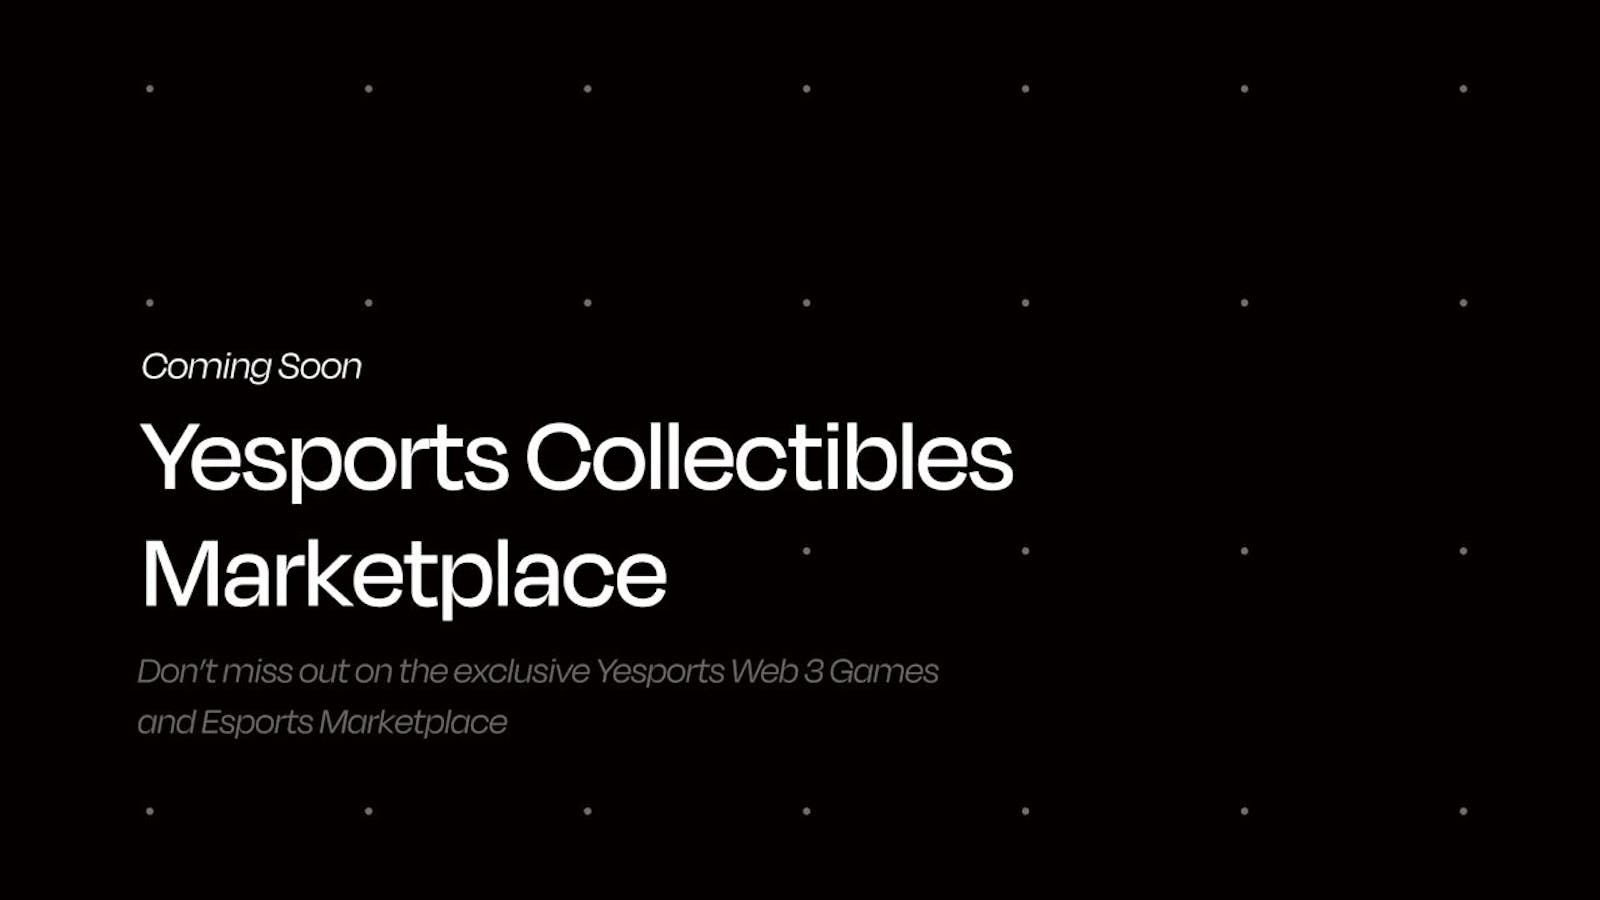 Yesports Collectibles Marketplace - Early Access 